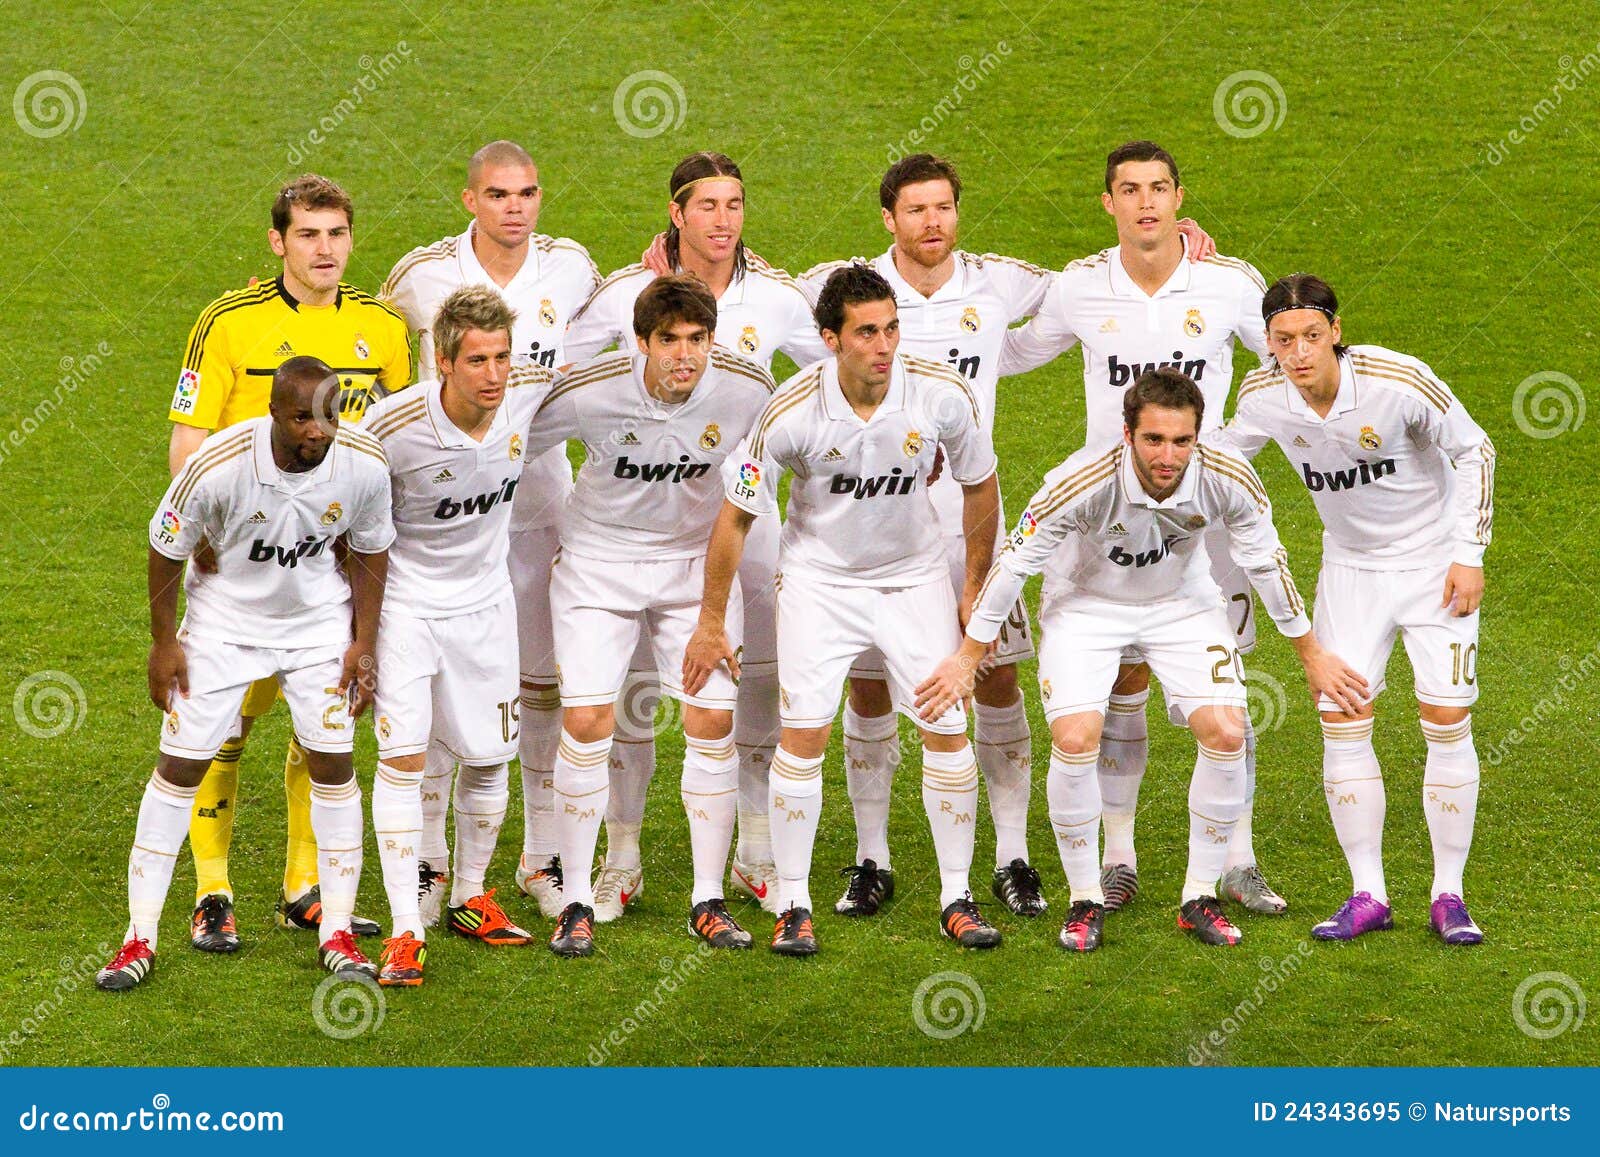 Real Madrid players editorial image. Image of cristiano - 24343695